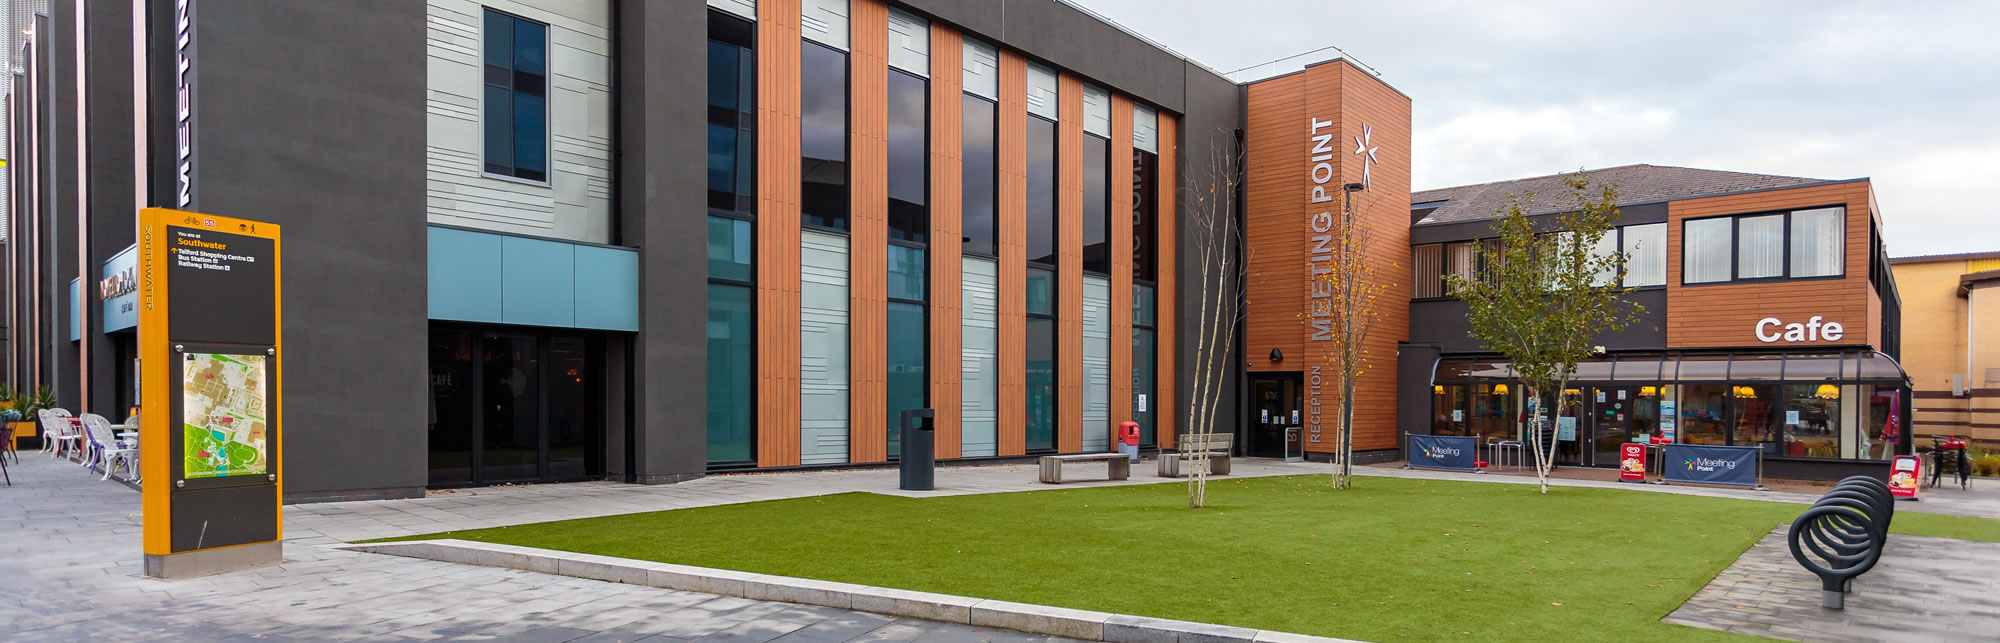 Meeting Point House - The central place to meet in Telford